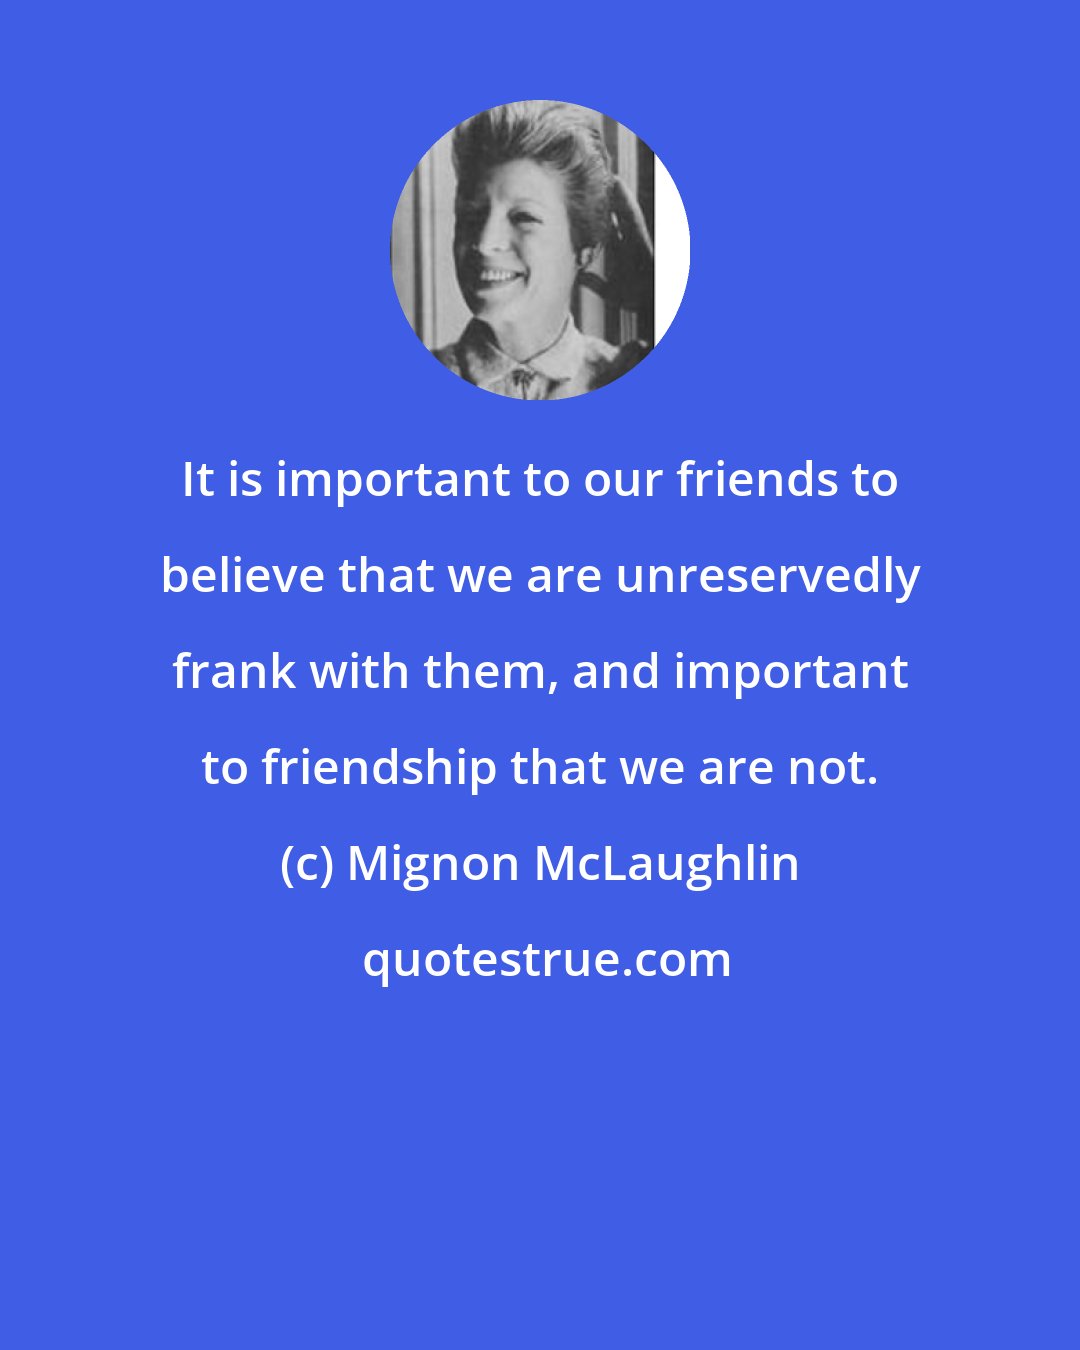 Mignon McLaughlin: It is important to our friends to believe that we are unreservedly frank with them, and important to friendship that we are not.